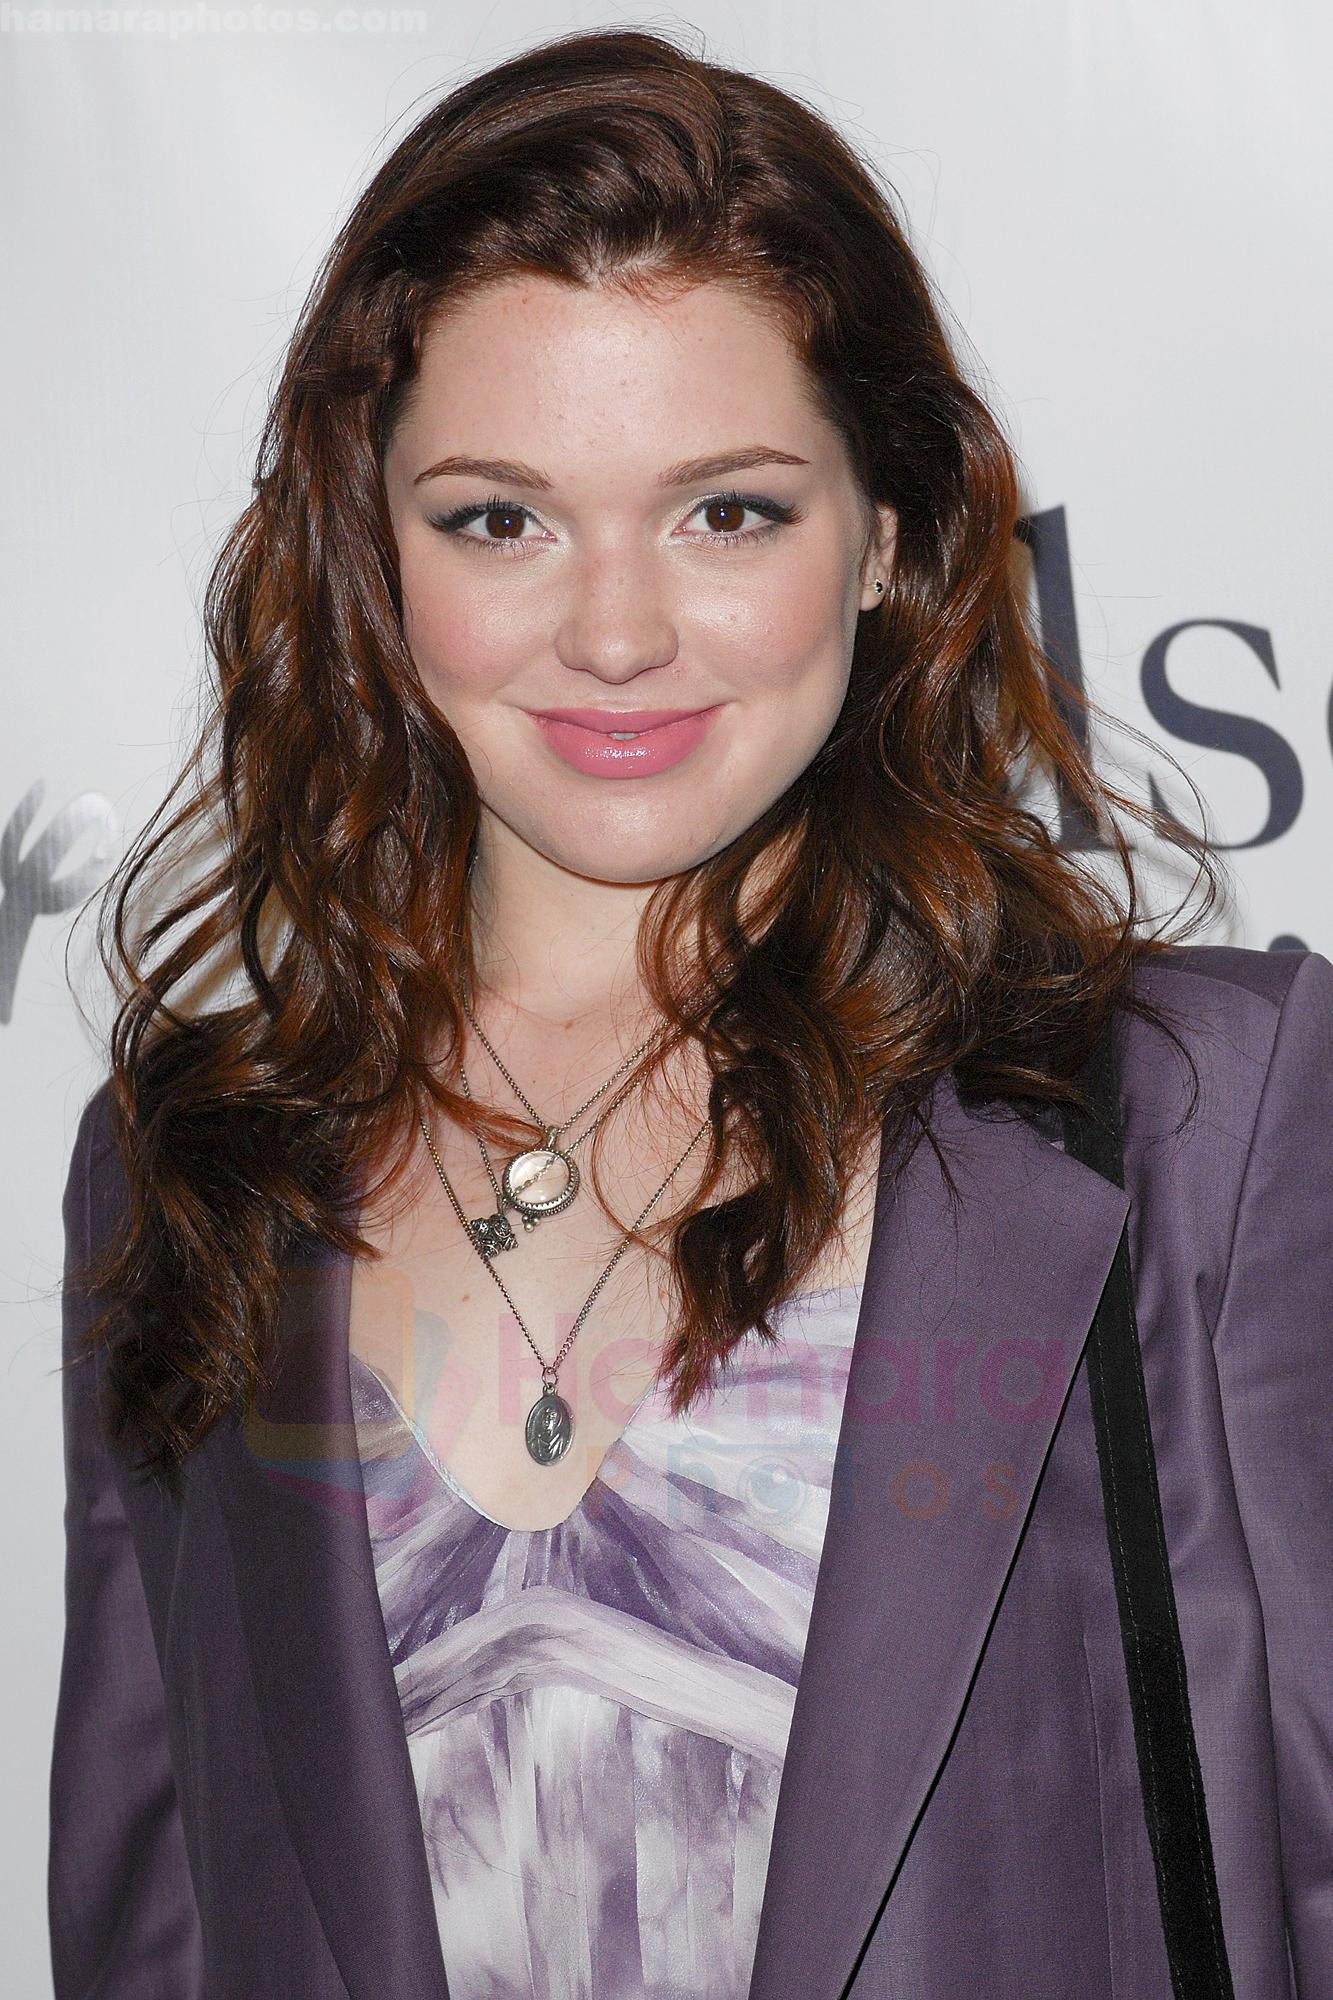 Jennifer Stone at the 24th Annual Imagen Awards held at the Beverly Hilton Hotel Los Angeles, California on 21.08.09 - IANS-WENN